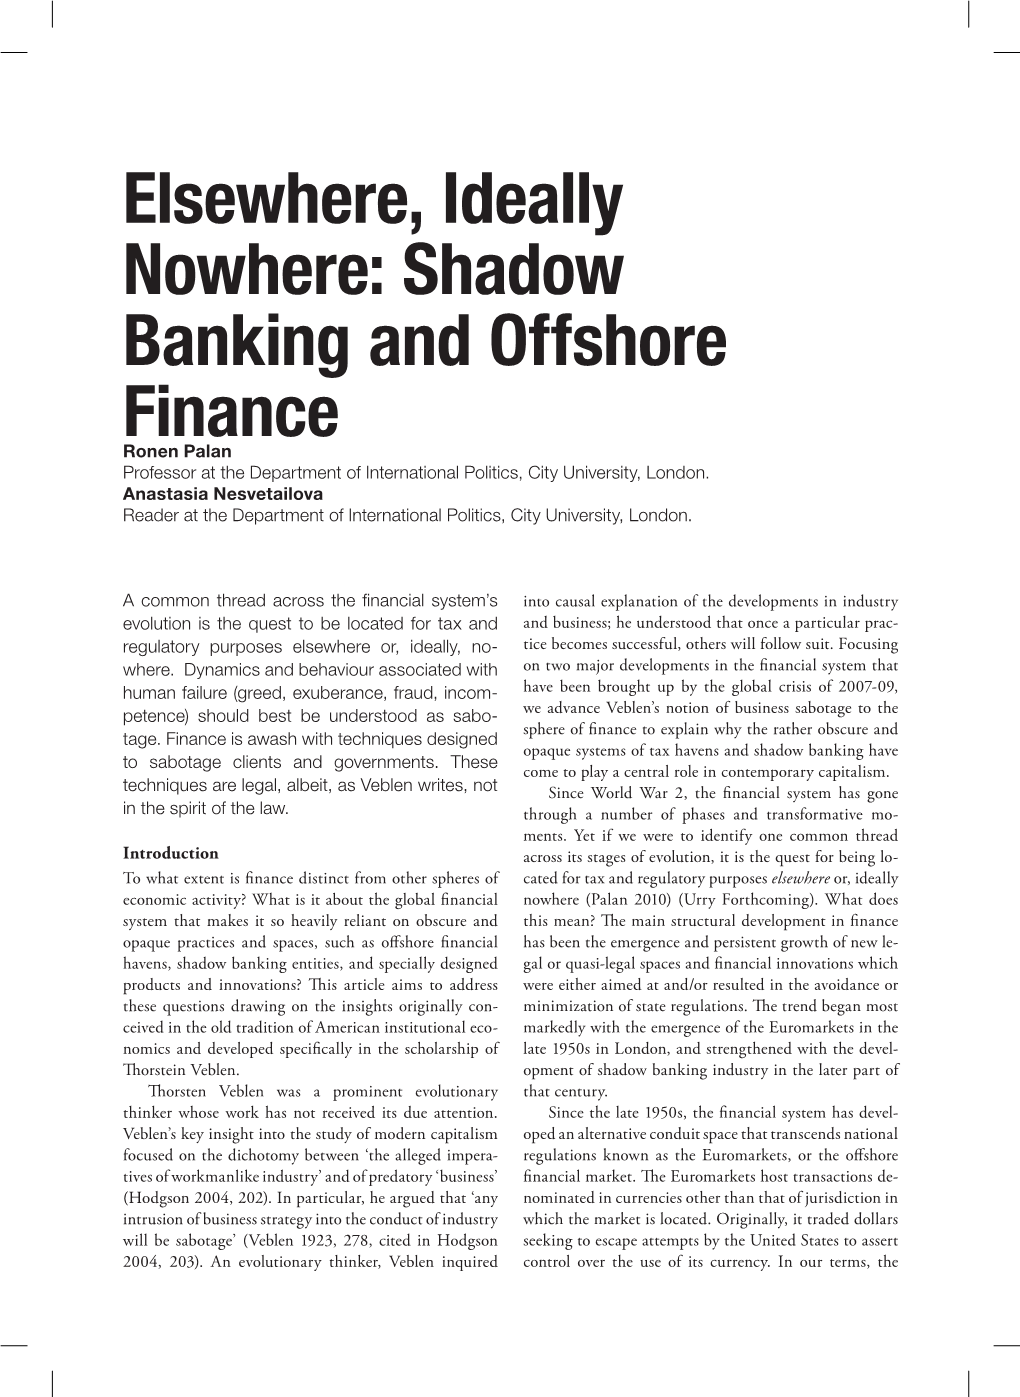 Elsewhere, Ideally Nowhere: Shadow Banking and Offshore Finance Ronen Palan Professor at the Department of International Politics, City University, London